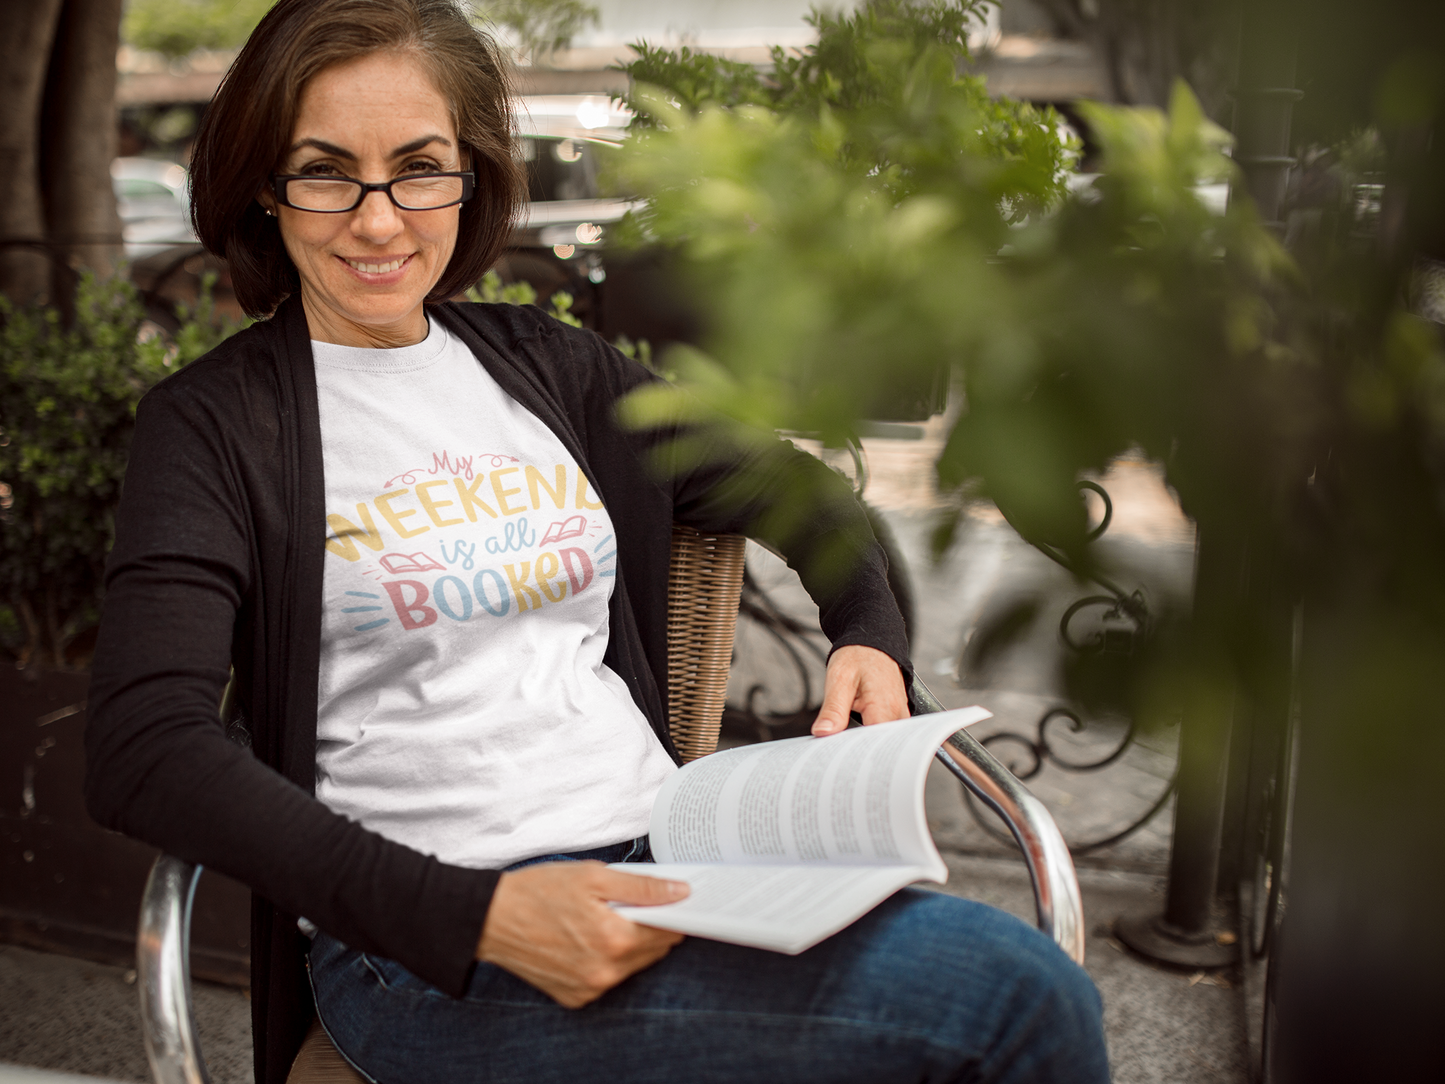 My Weekend is all Booked - Bookish T-shirt